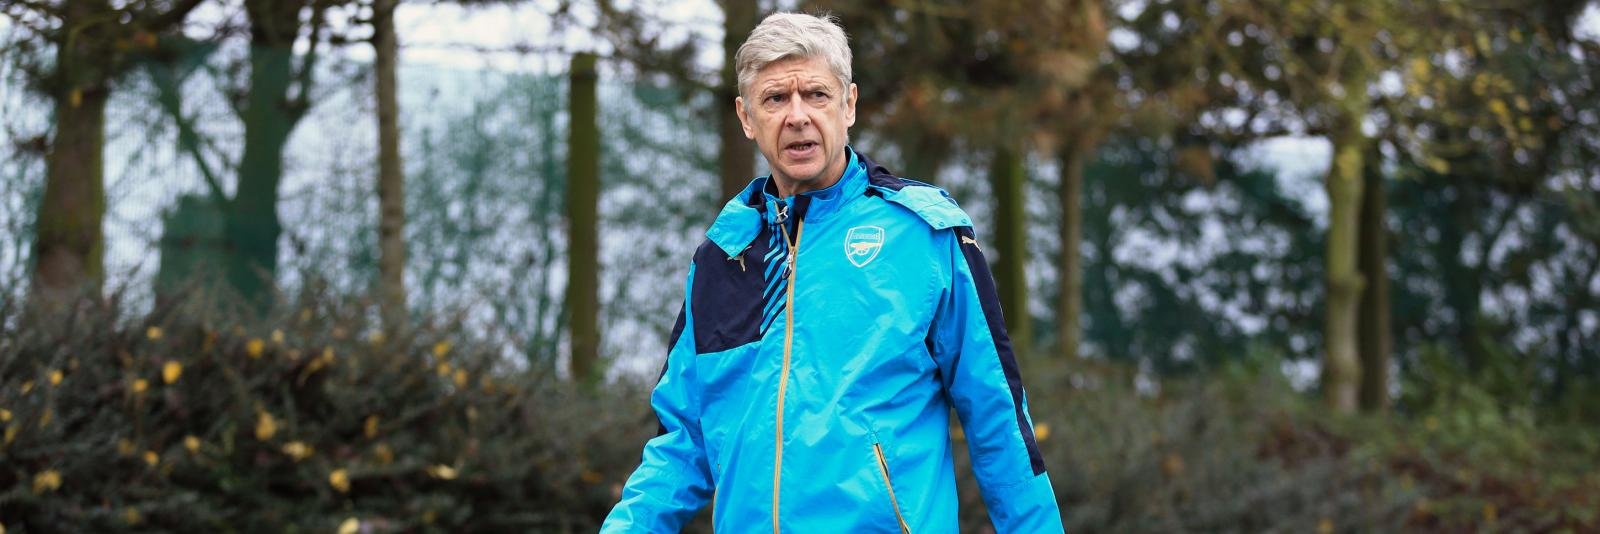 Watch: Will Wenger regret selling this star? Ex-Arsenal ace stuns team-mates with blistering pace